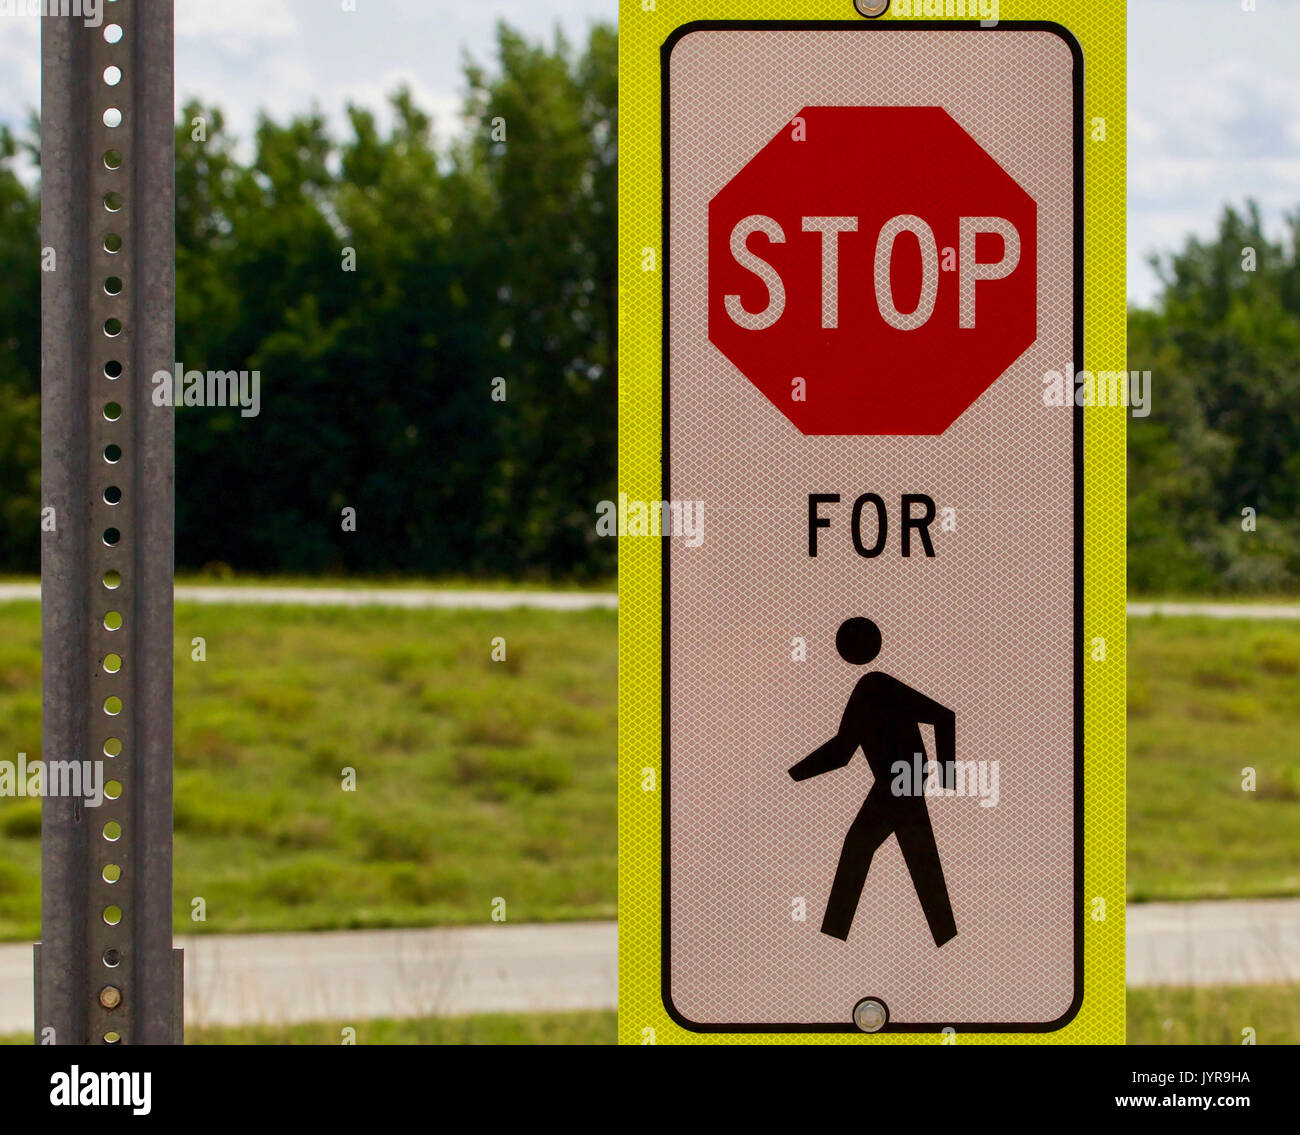 Stop for pedestrian sign against a green background Stock Photo